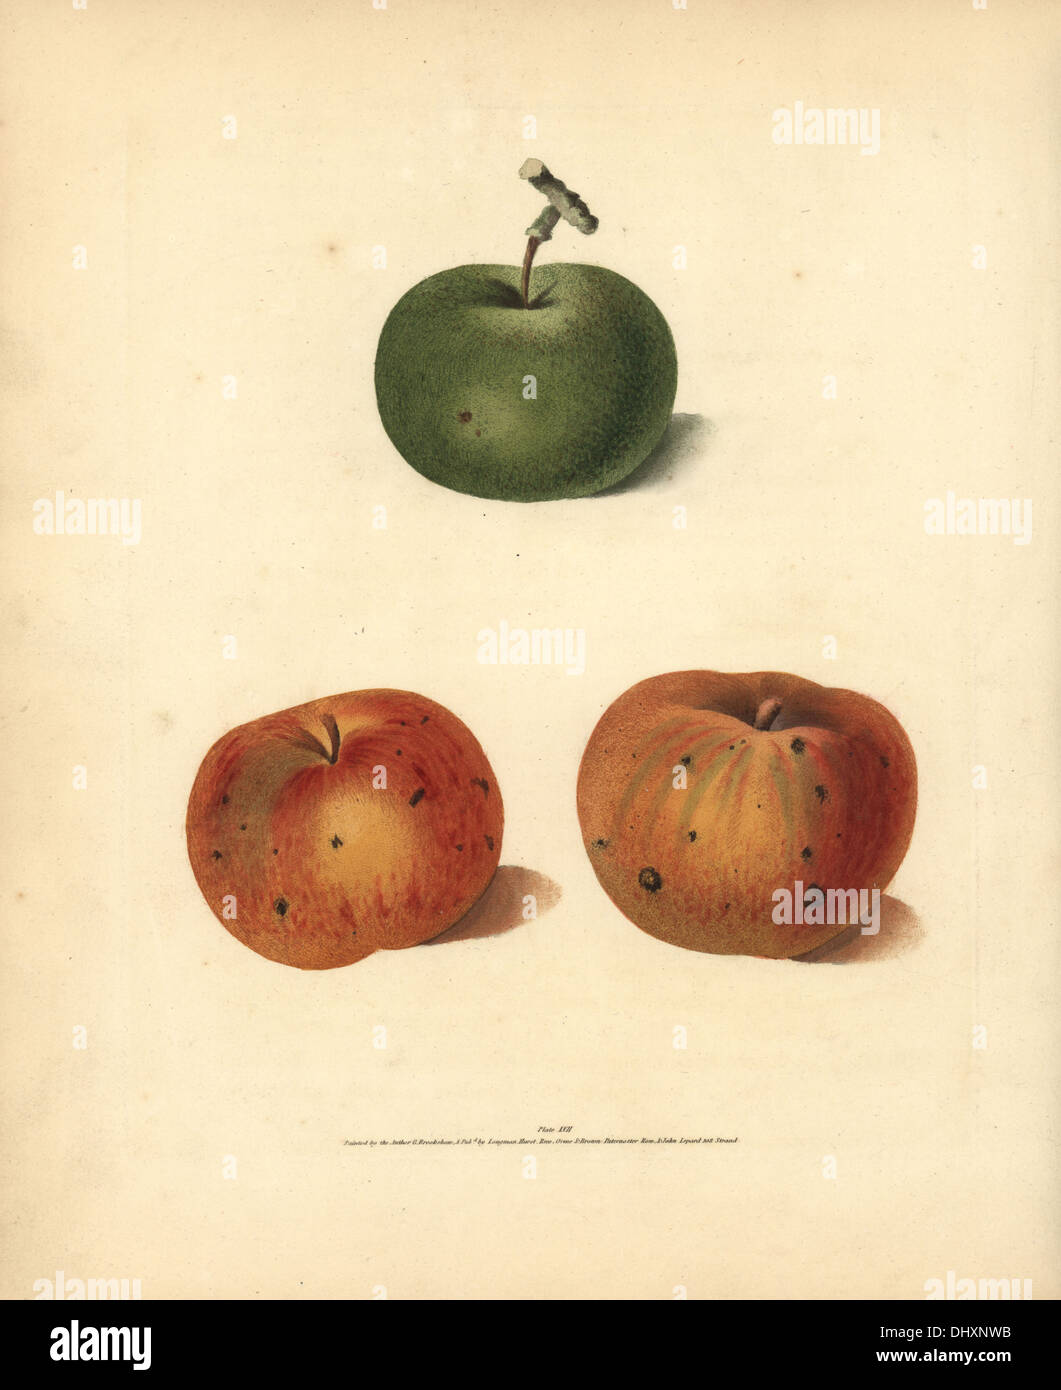 Apple varieties, Malus domestica: Rhenet Gray, Margill and Ripstone Pippin. Stock Photo